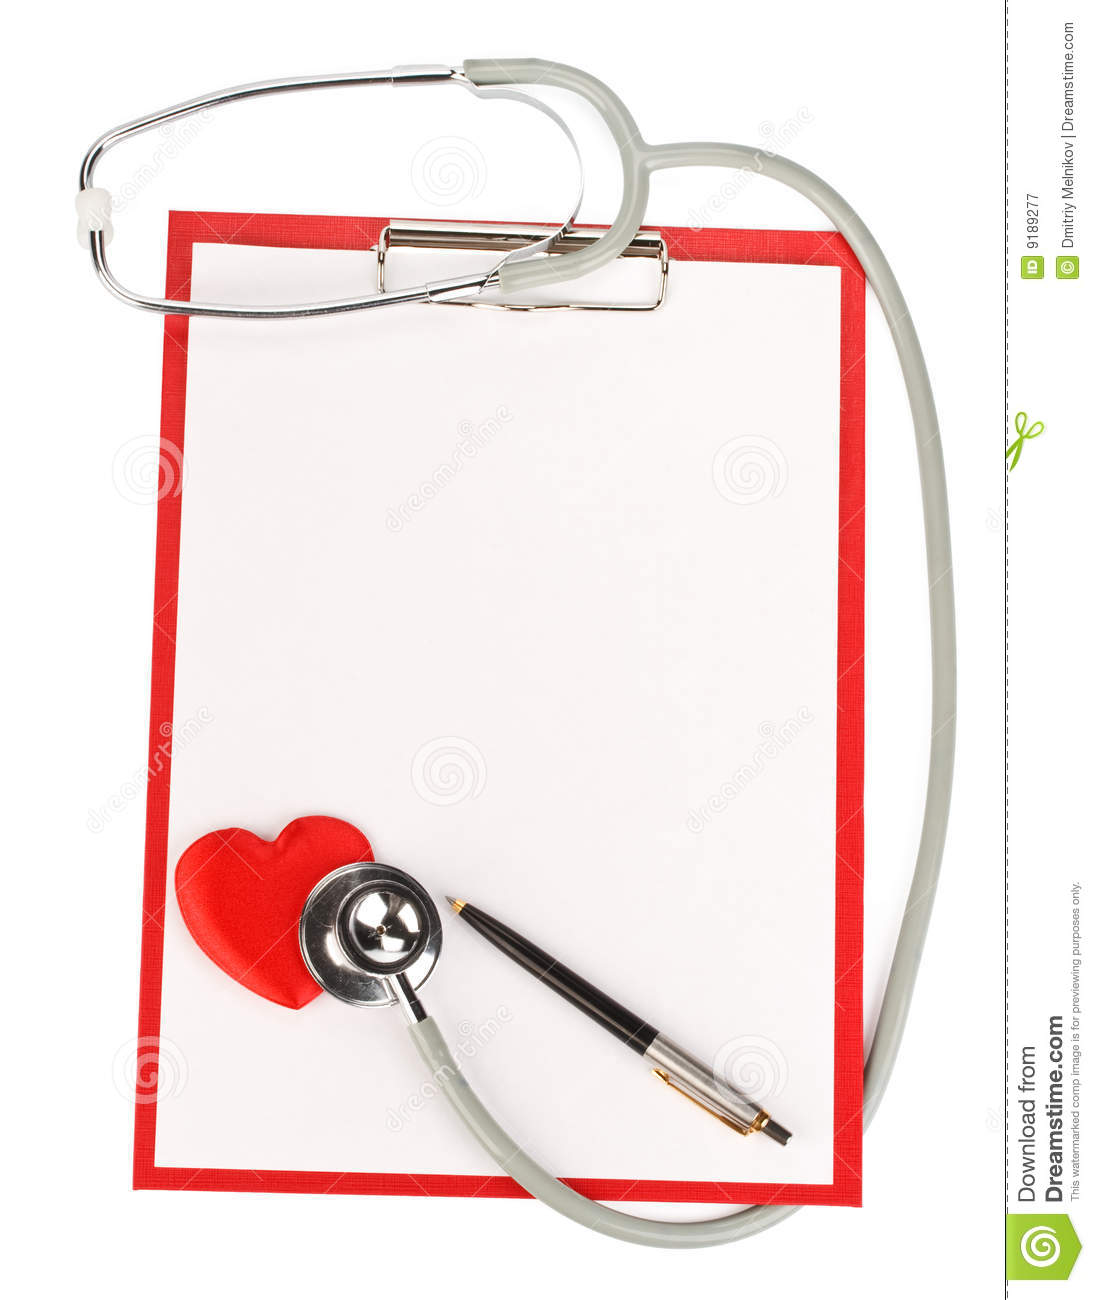 Medical Clipboard With Blank Paper For Messages And A Stethoscope 